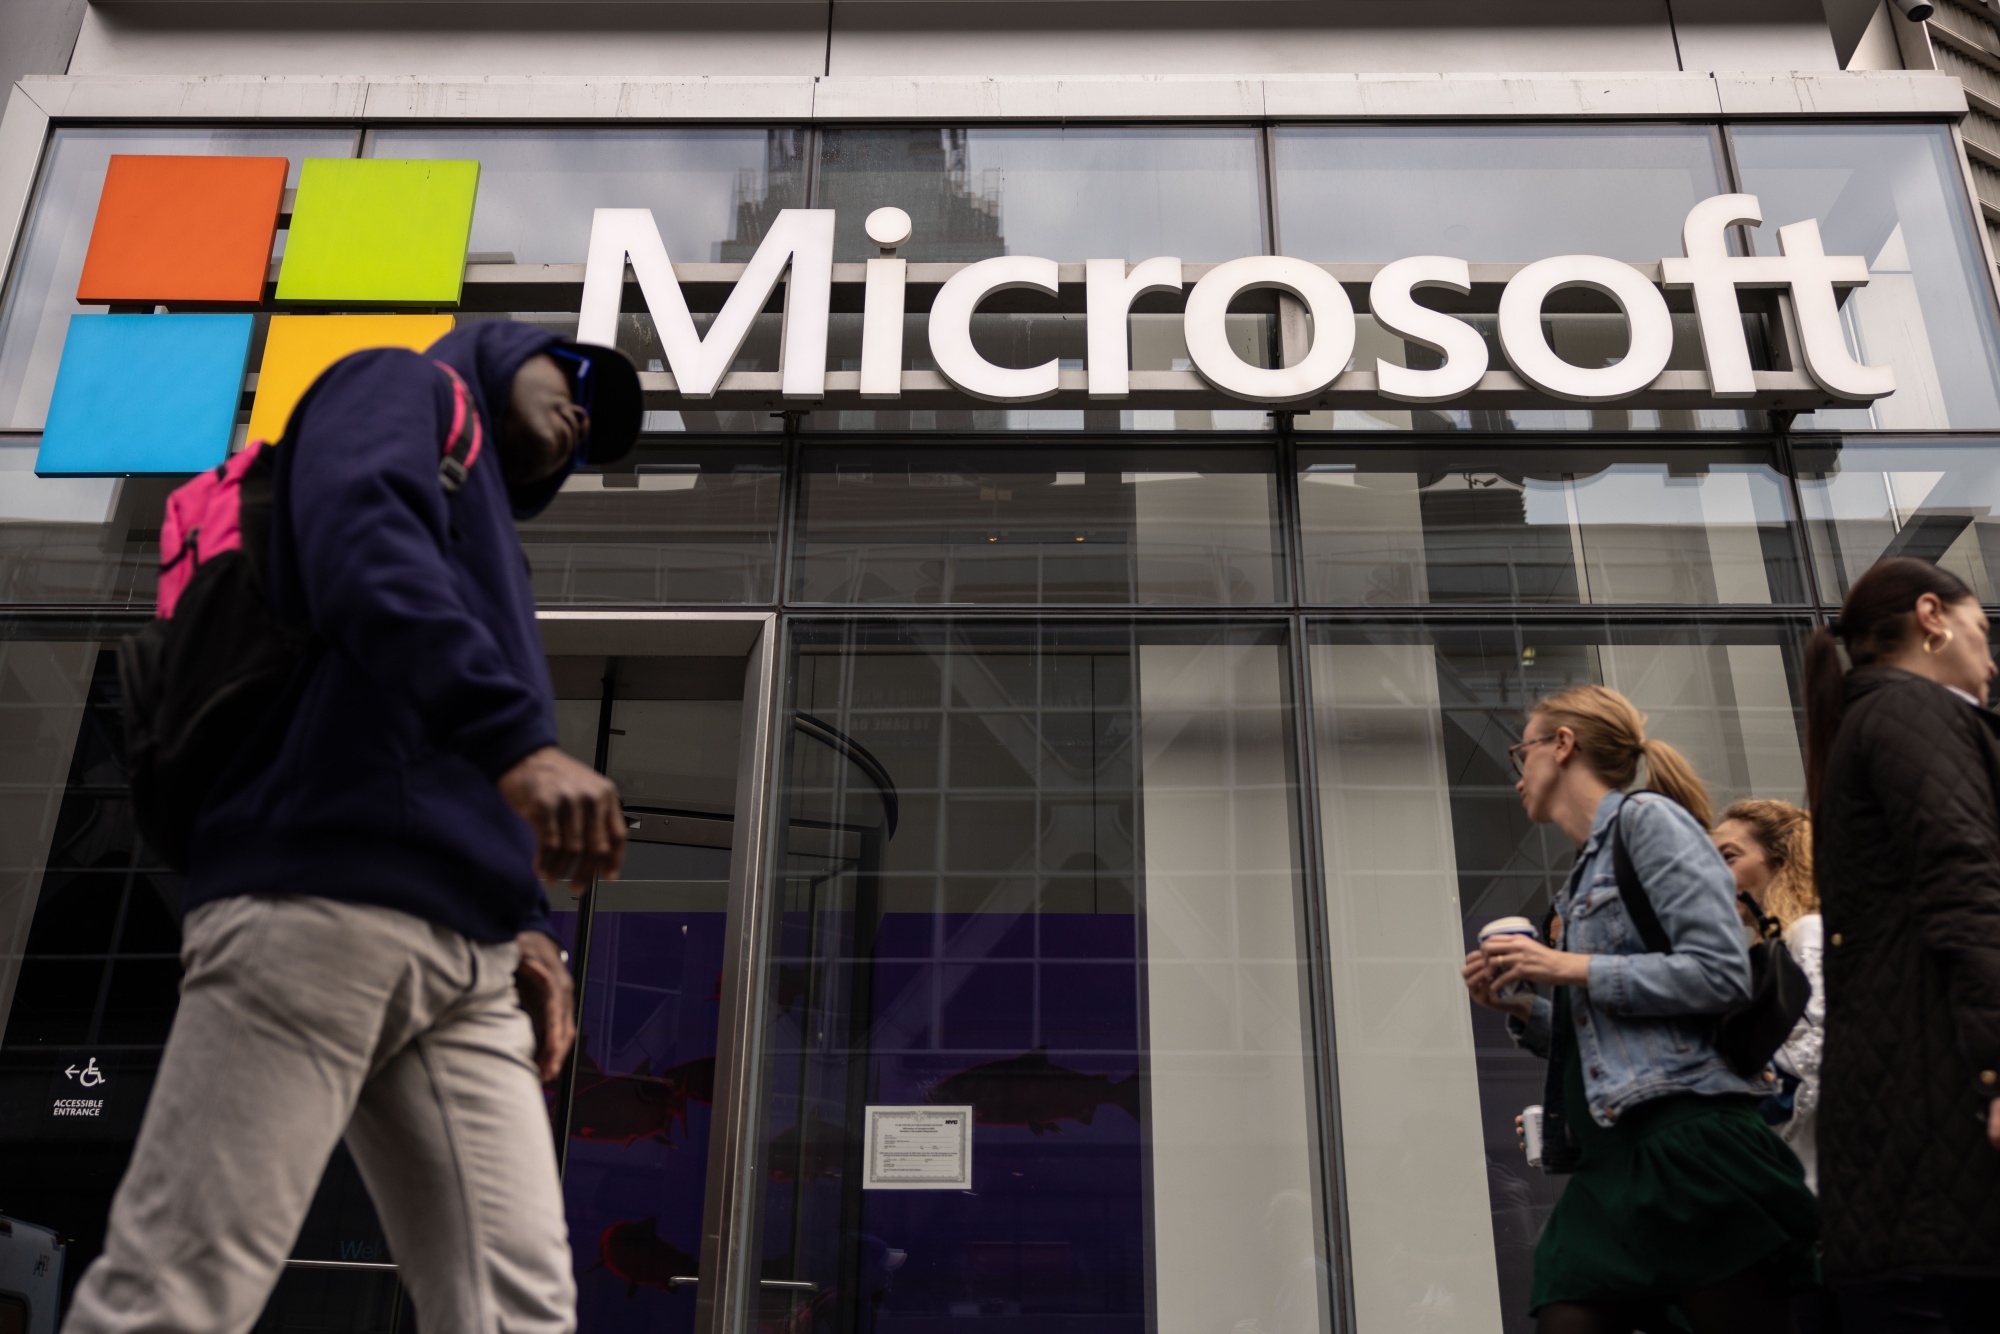 Microsoft is teaming up with Be My Eyes, an app for the blind and visually impaired, to make it easier for such people to access the company’s customer service.